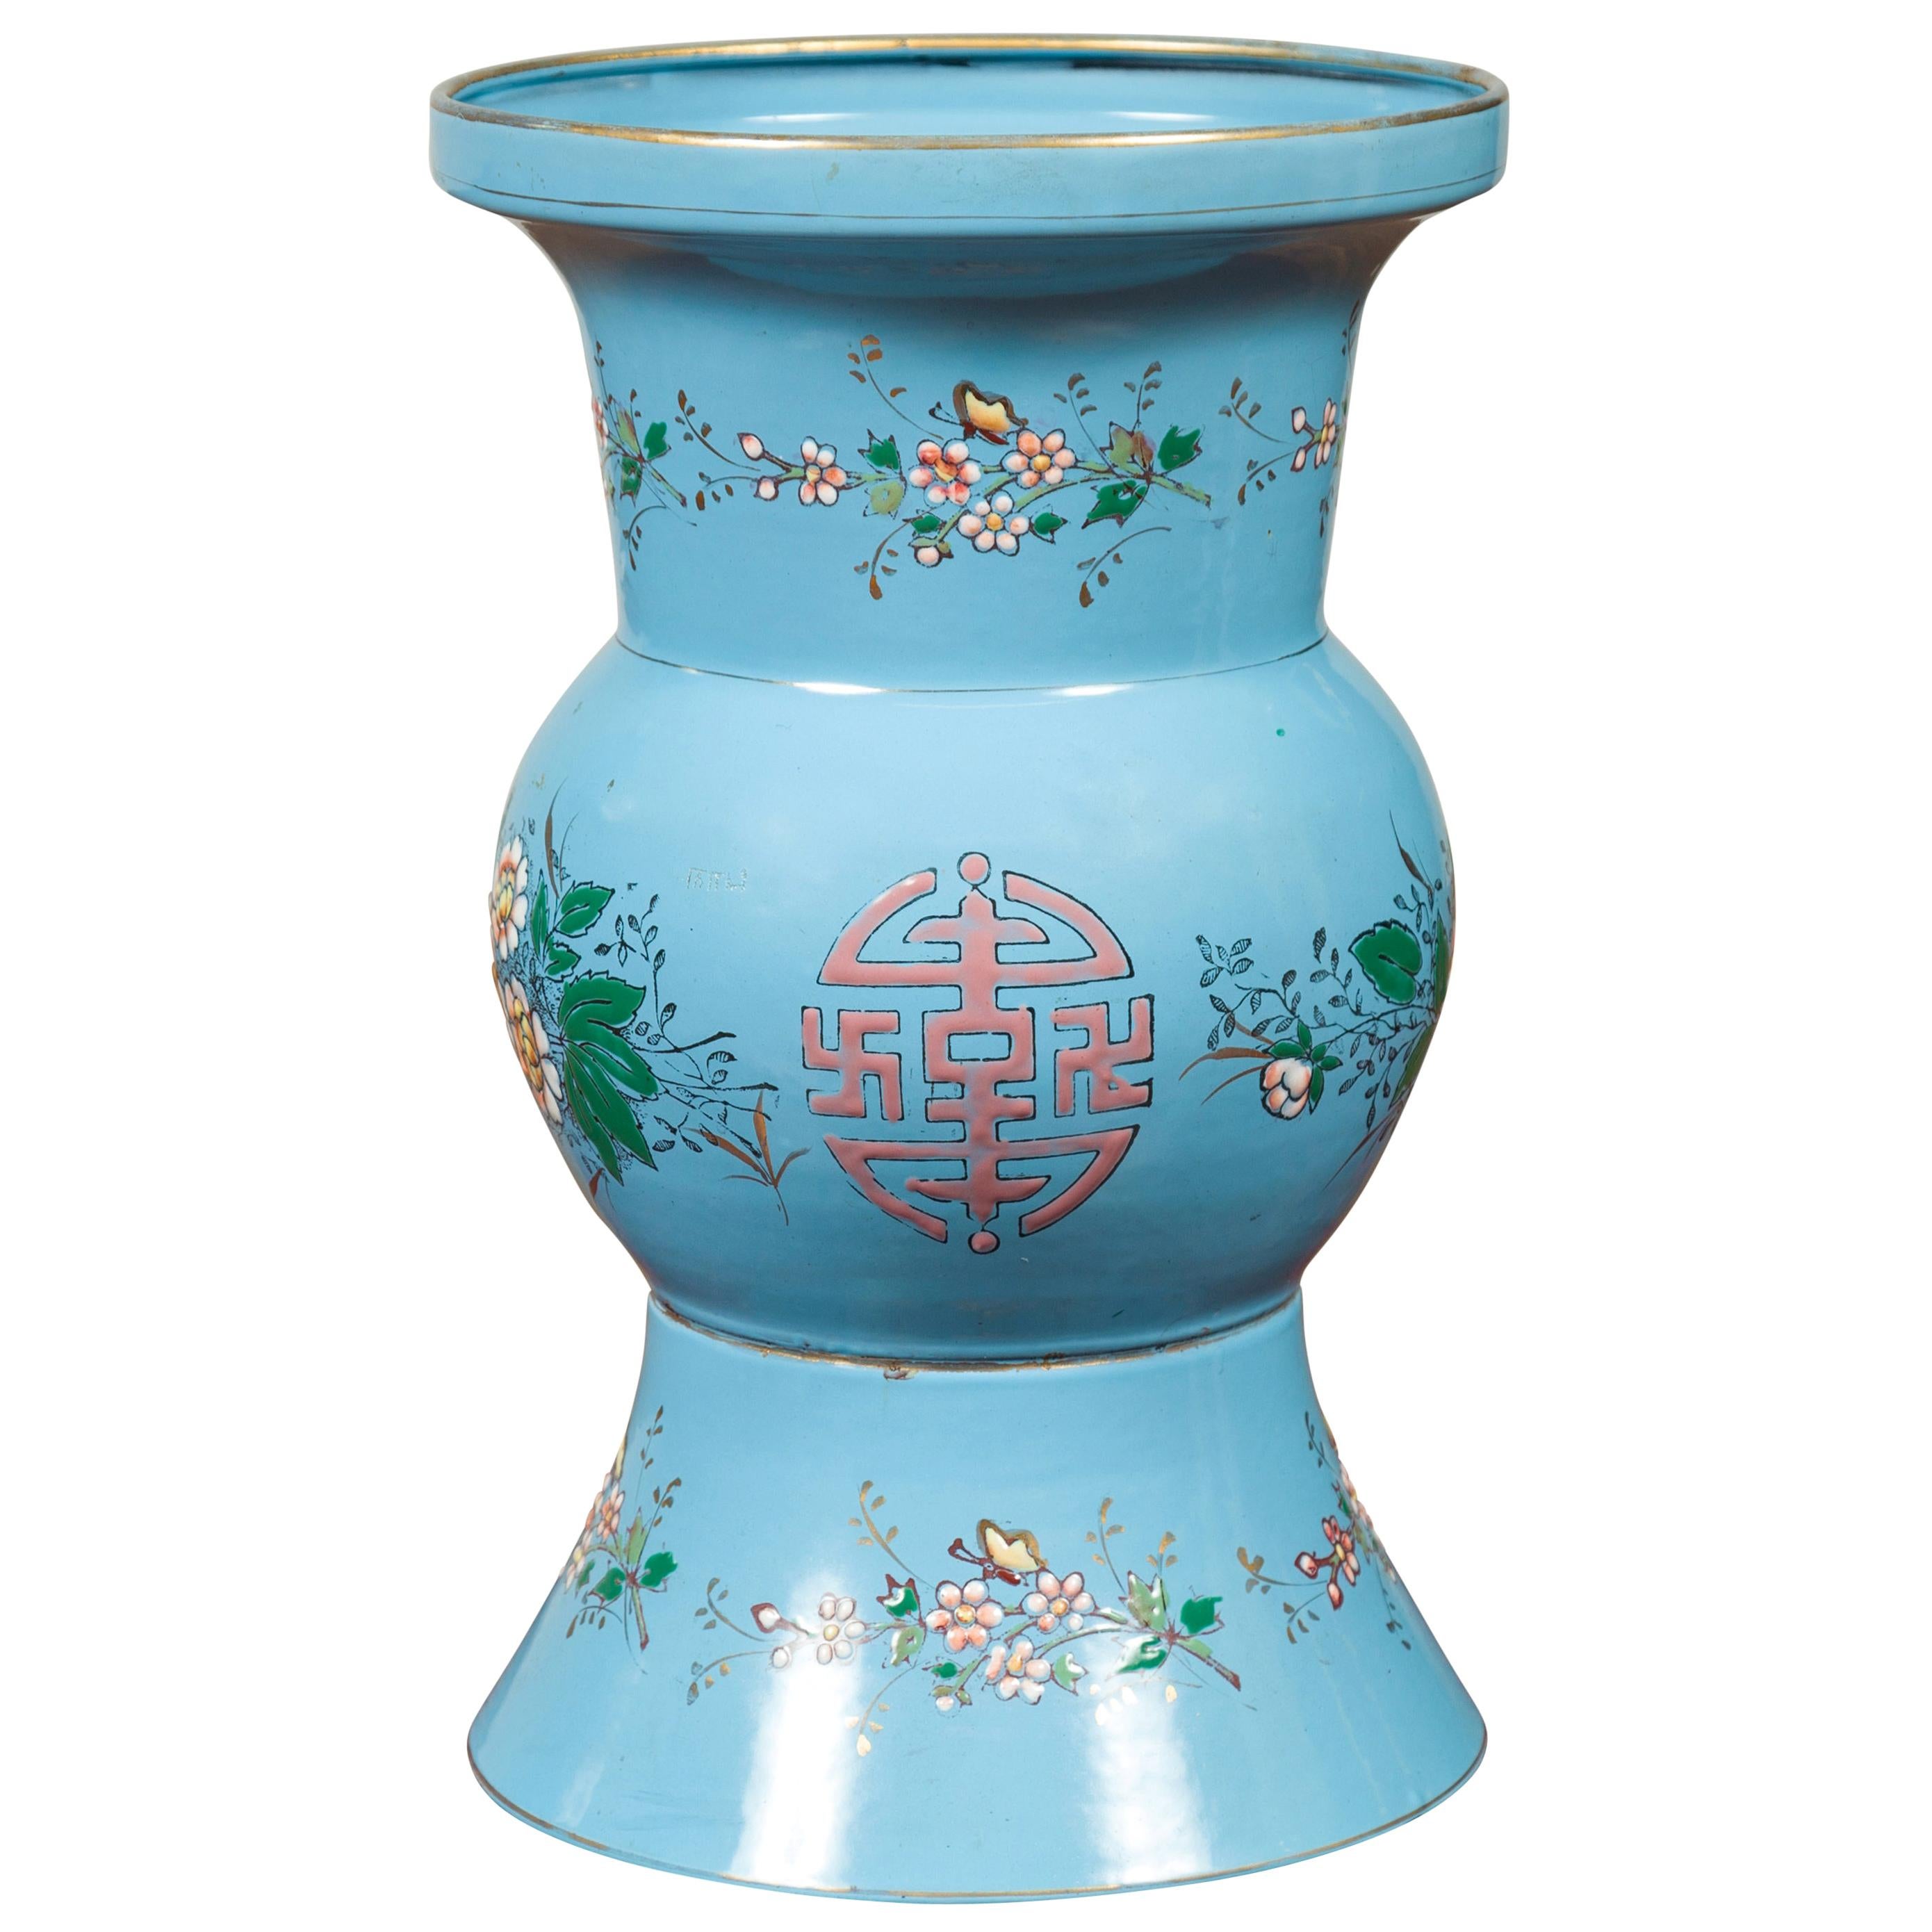 Vintage Chinese Hand Painted Blue Metal Vase with Calligraphy and Floral Décor